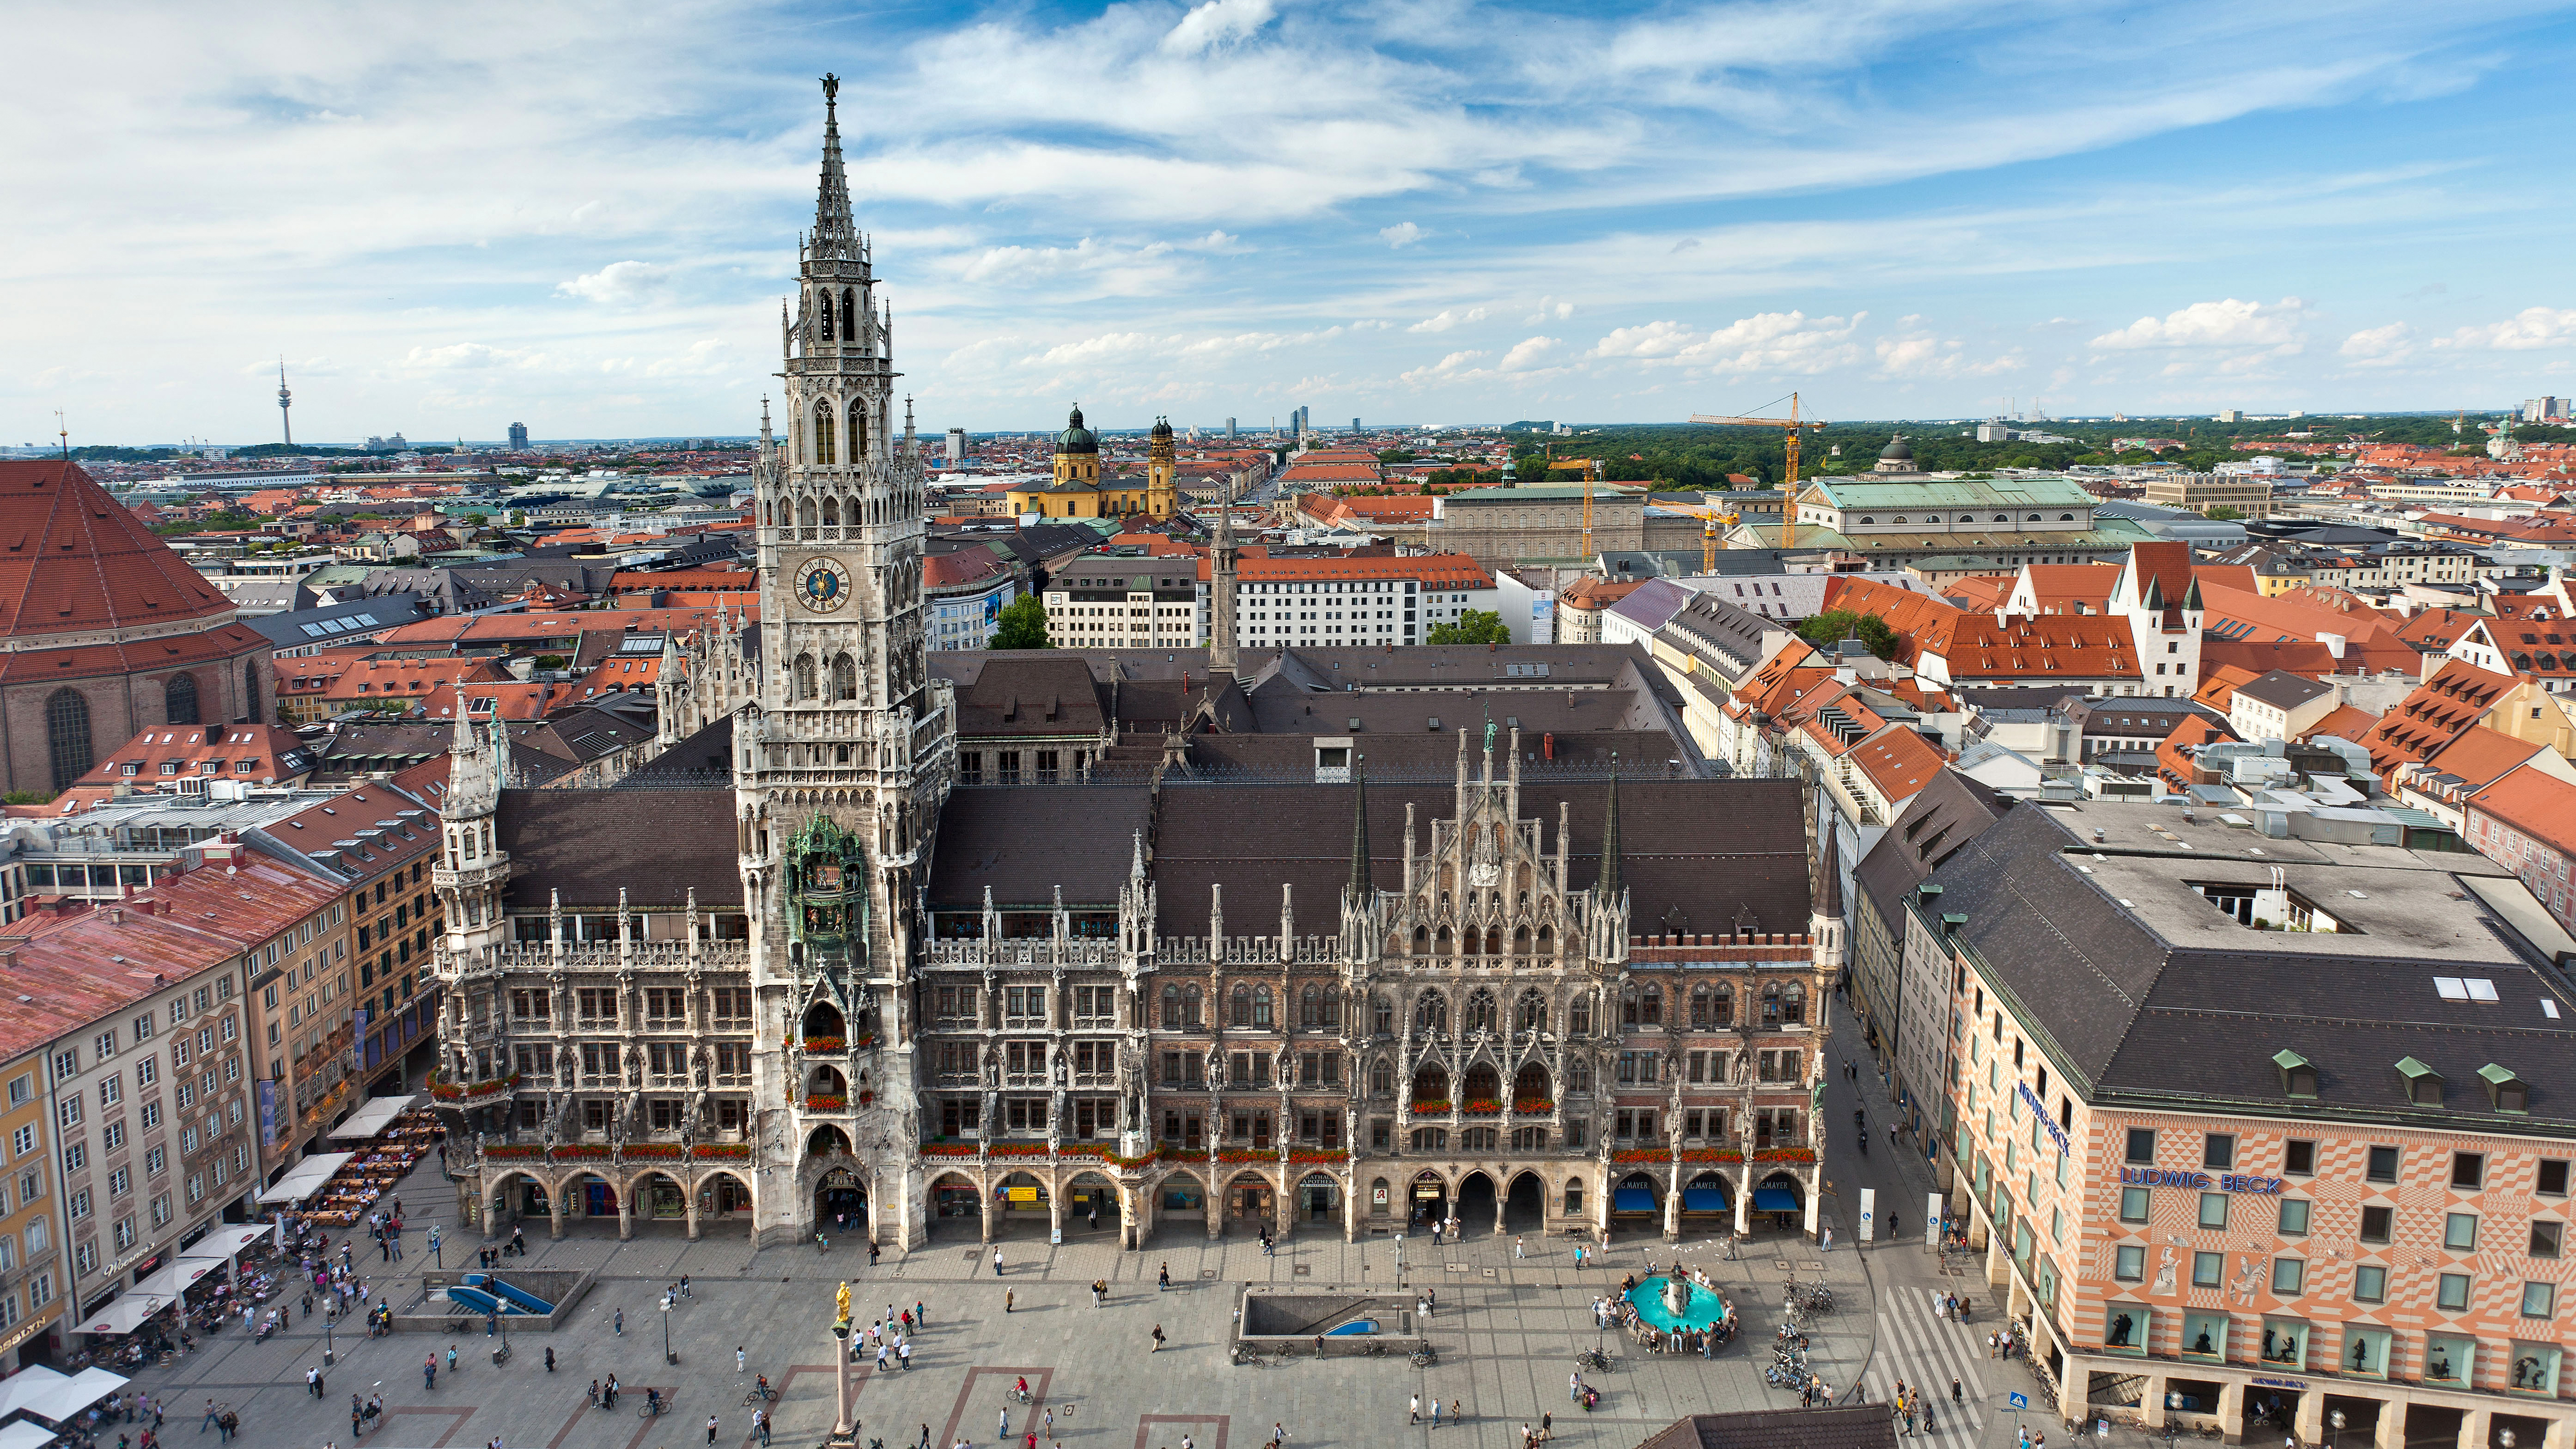 Munich: A Metropolis with Small-Town Charm by Rick Steves